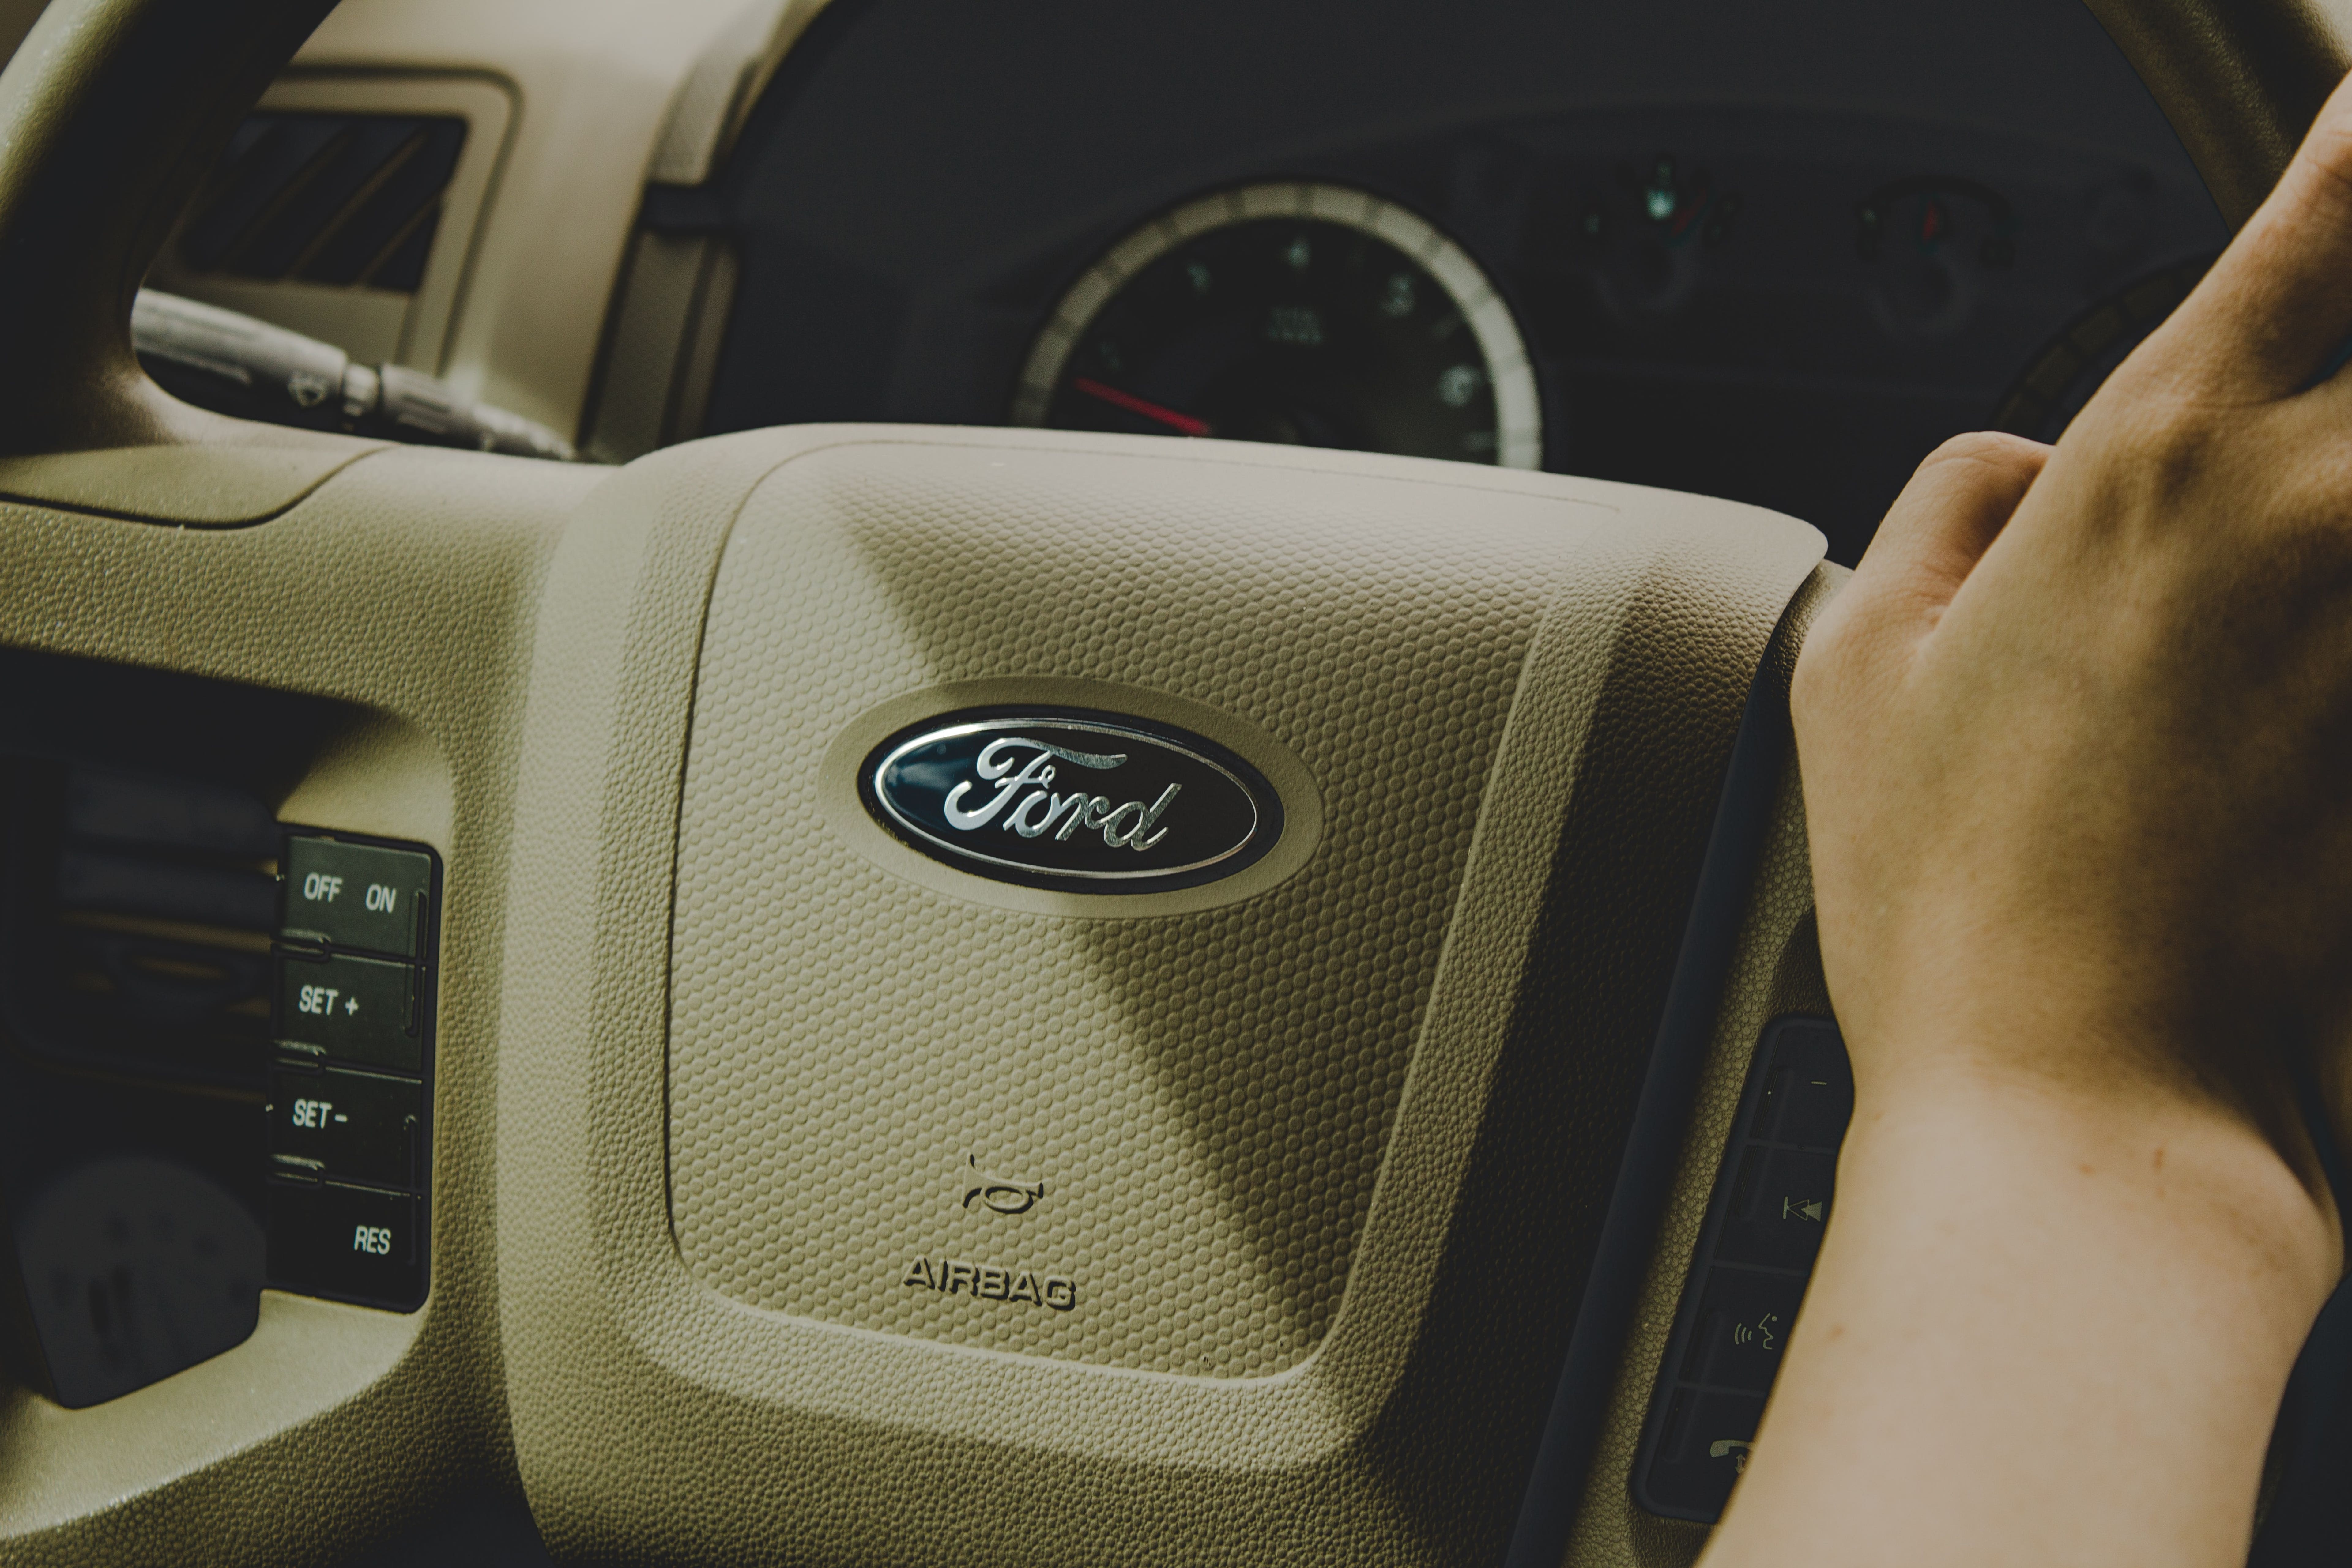 Ford Must Recall 3M Vehicles Due To Dangerous Airbags, Orders NHTSA